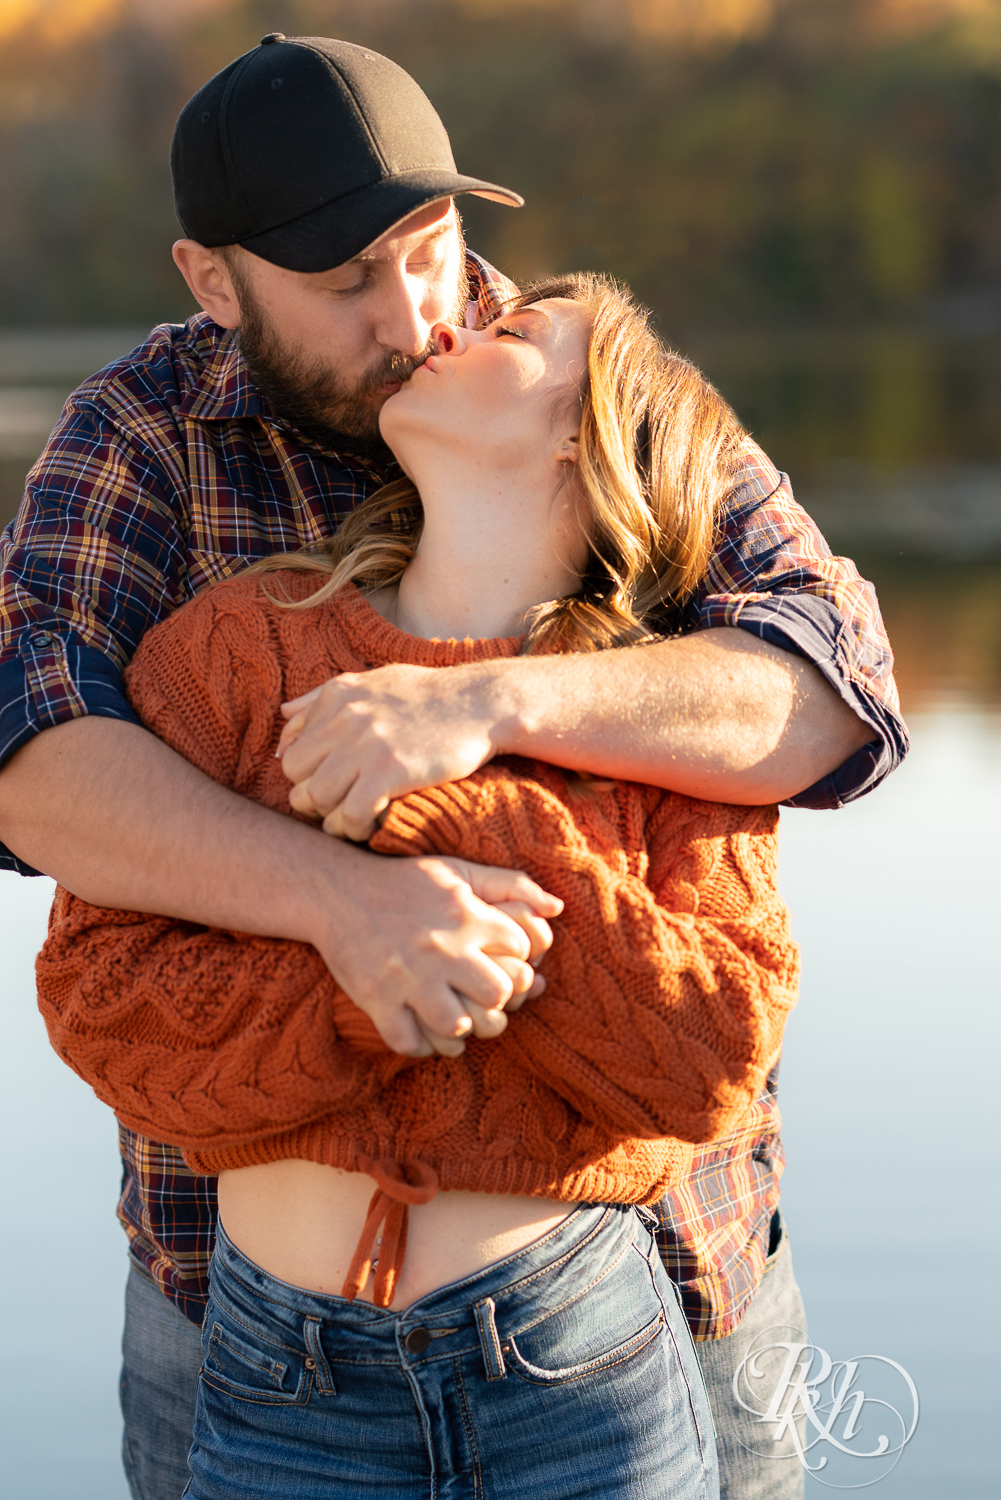 Man in flannel and woman in jeans and sweater kissing in sunset in Eagan, Minnesota.